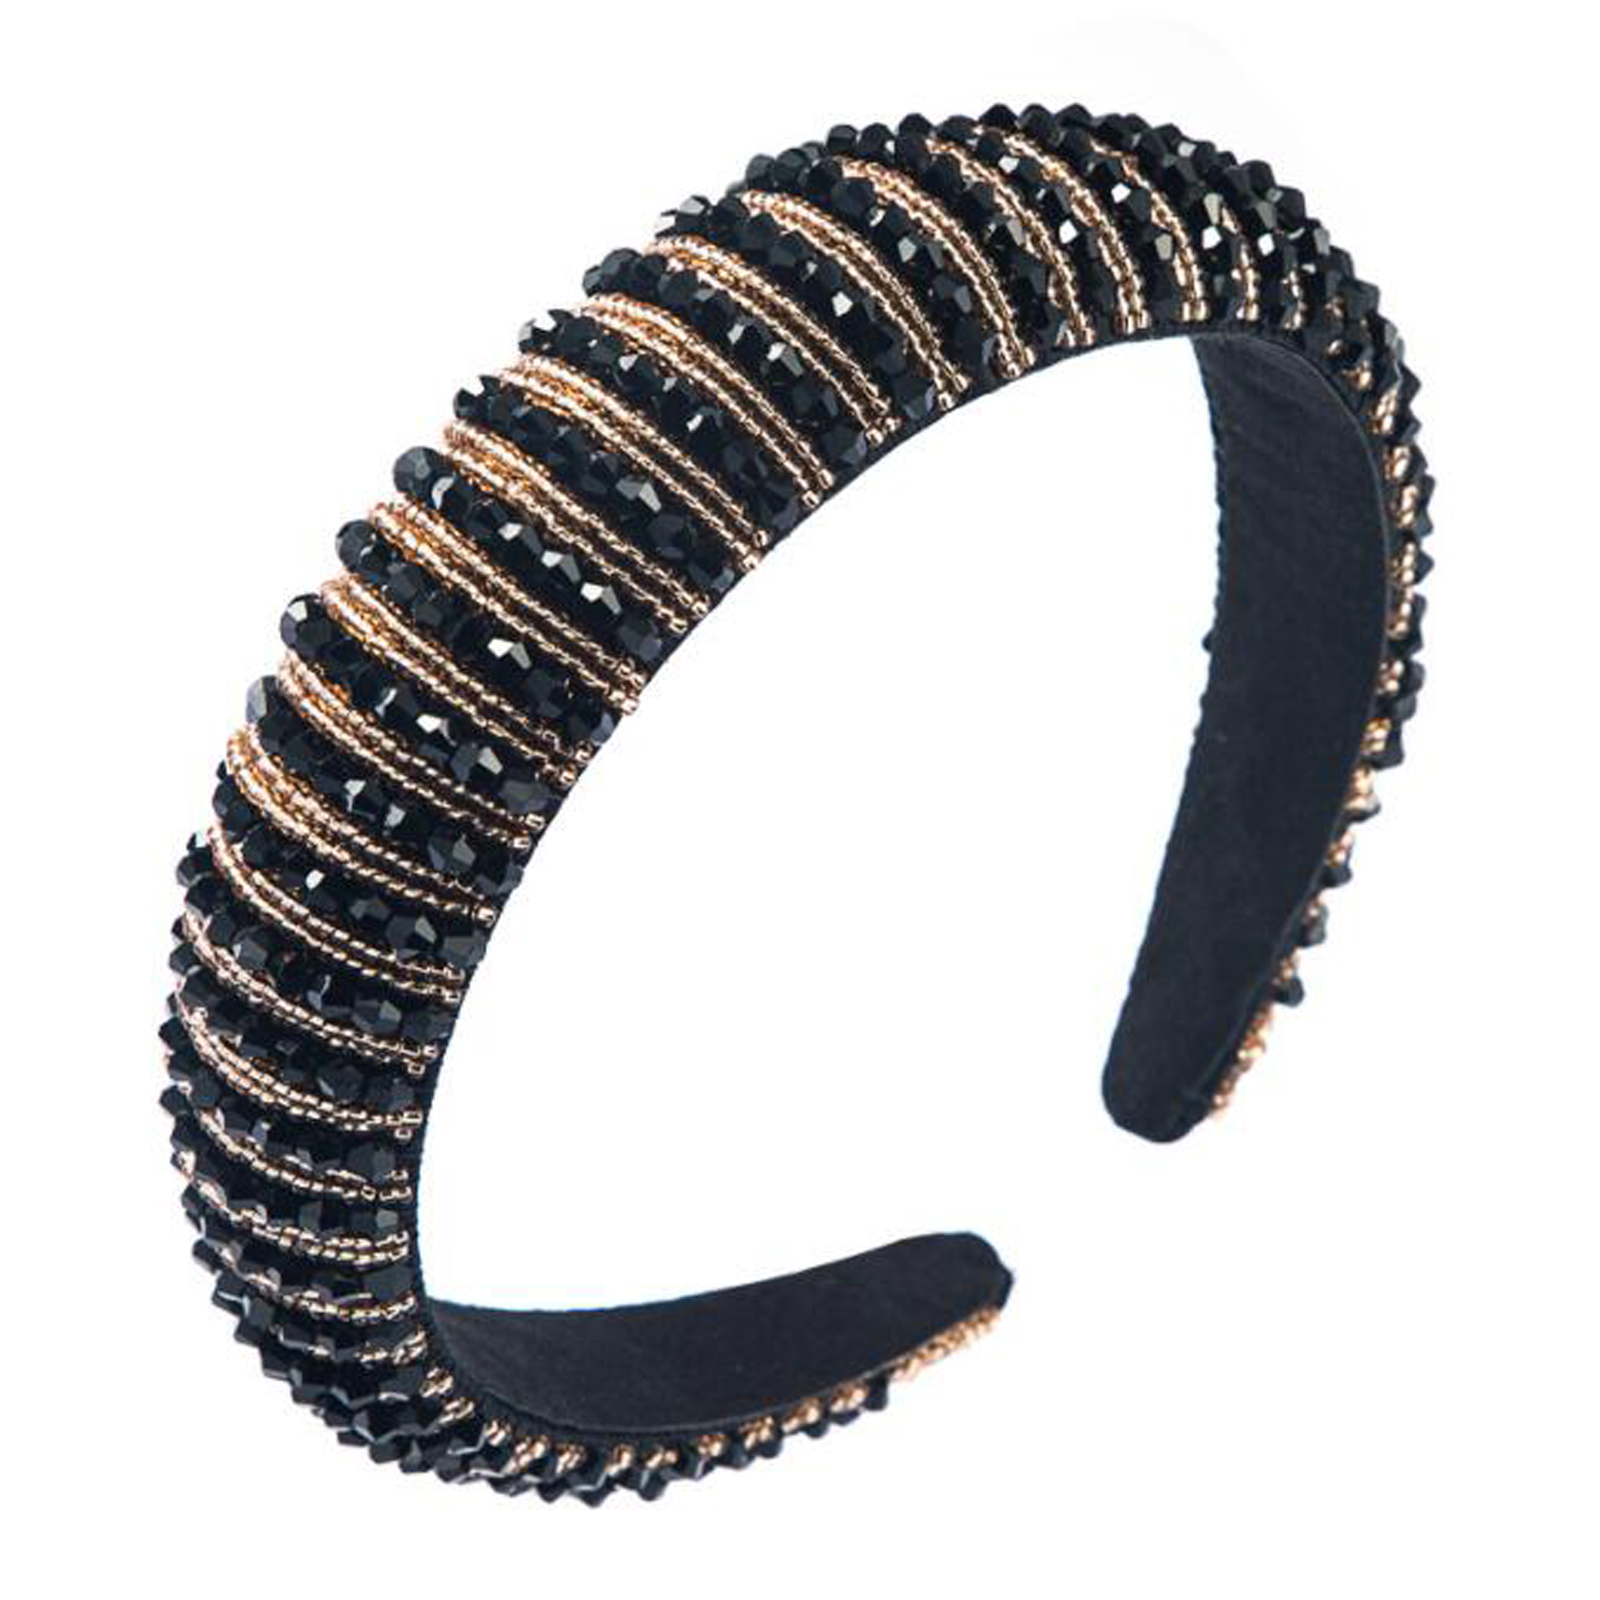 PROLY New Fashion Hairband For Women Full Beads Paved Wide Side Headband Top Luxurious Baroque Hair Accessories Wholesale